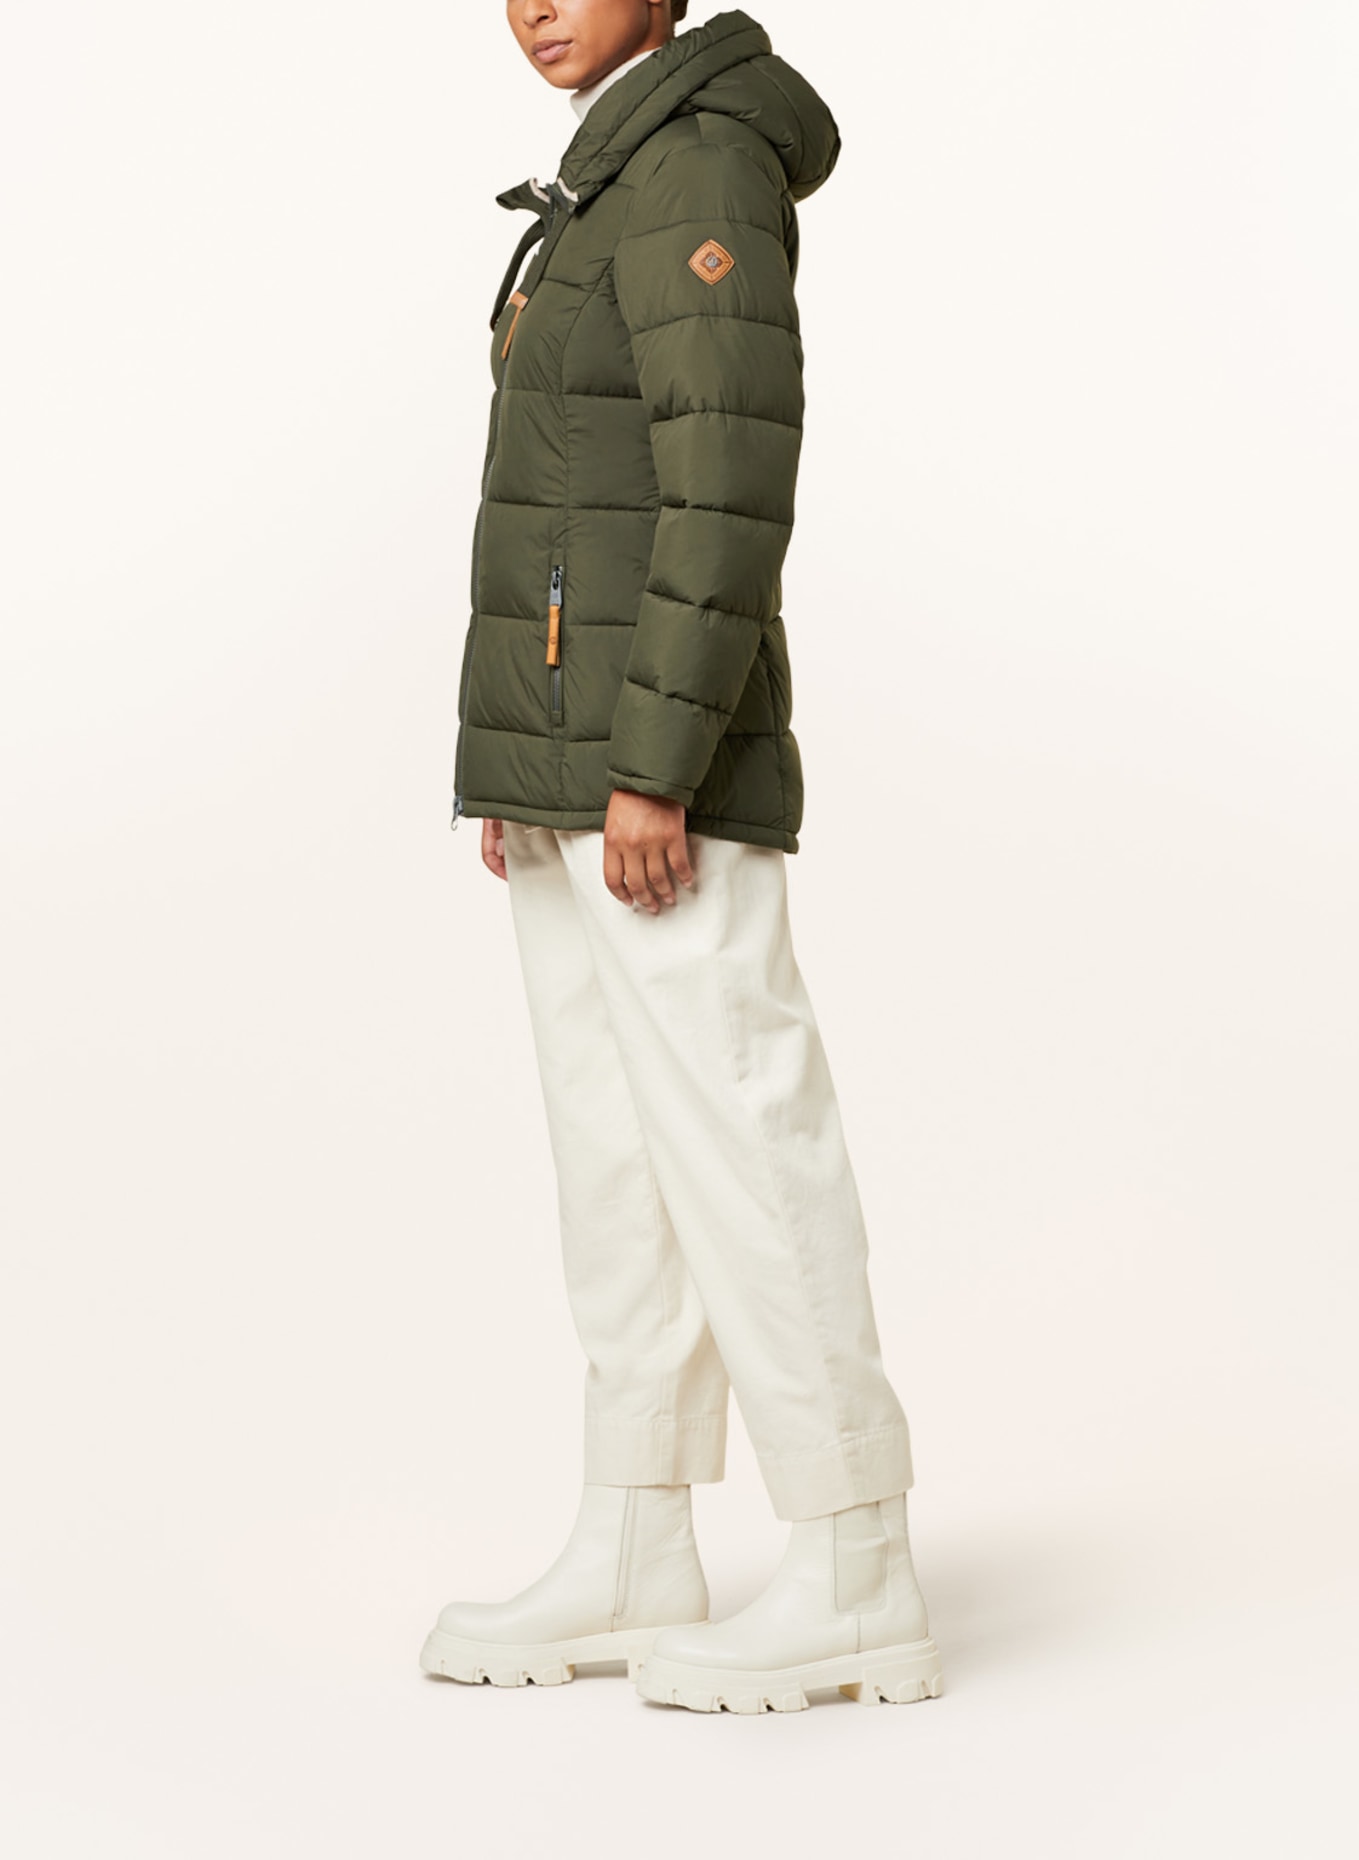 G.I.G.A. DX by killtec jacket in Quilted olive